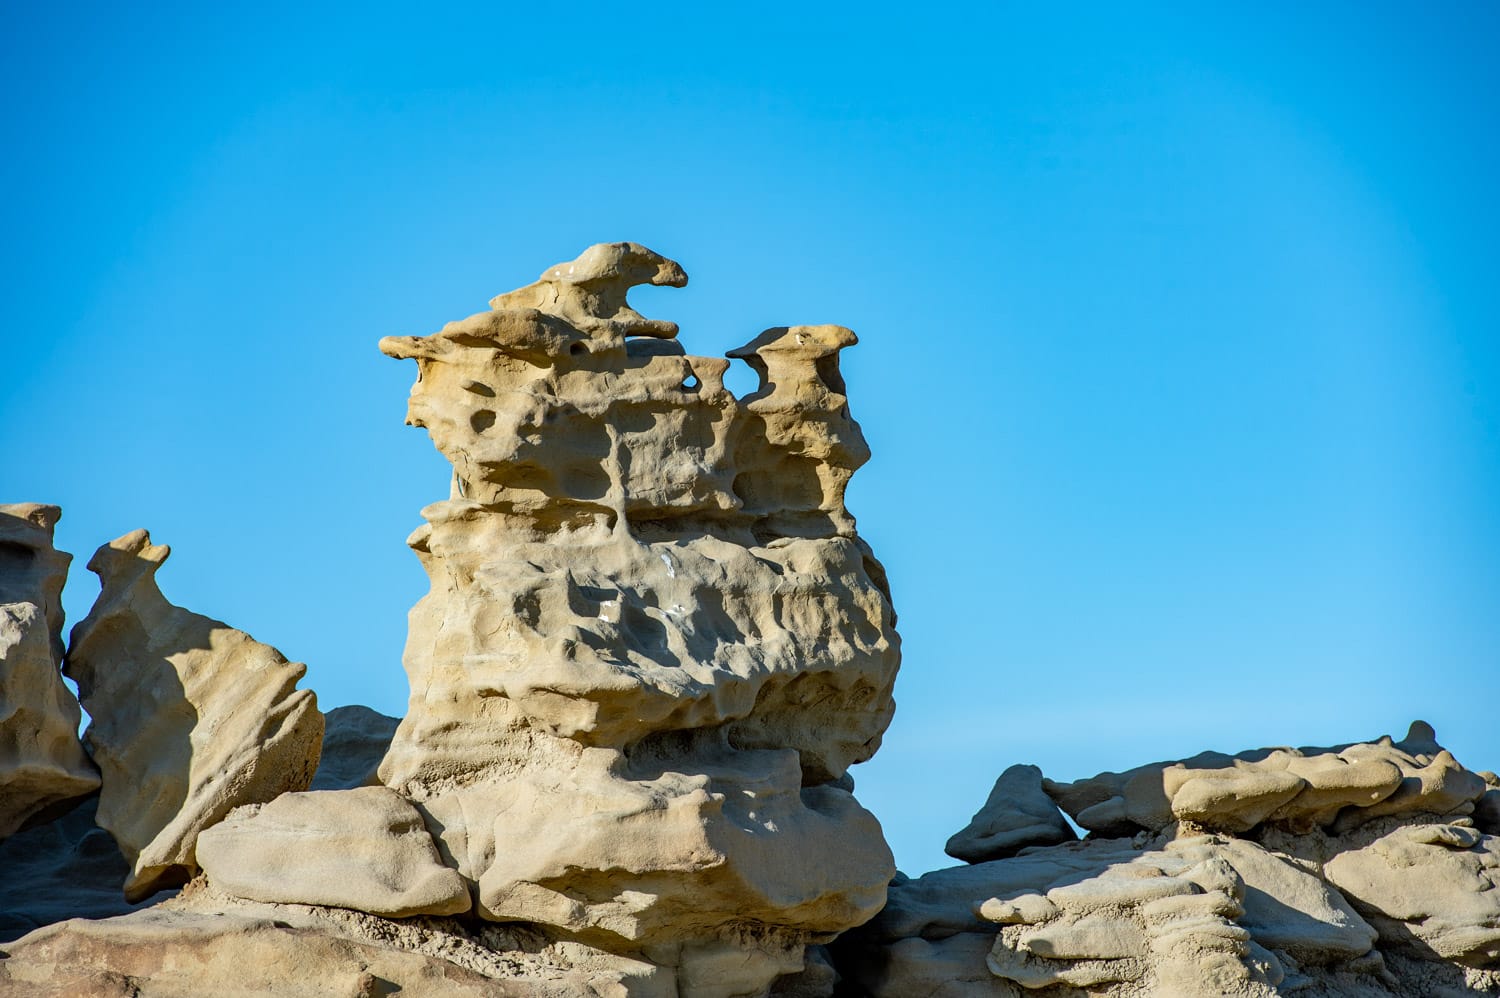 Fanciful figures naturally sculpted in the sandstone of Fantasy Canyon, south of Vernal, Utah.